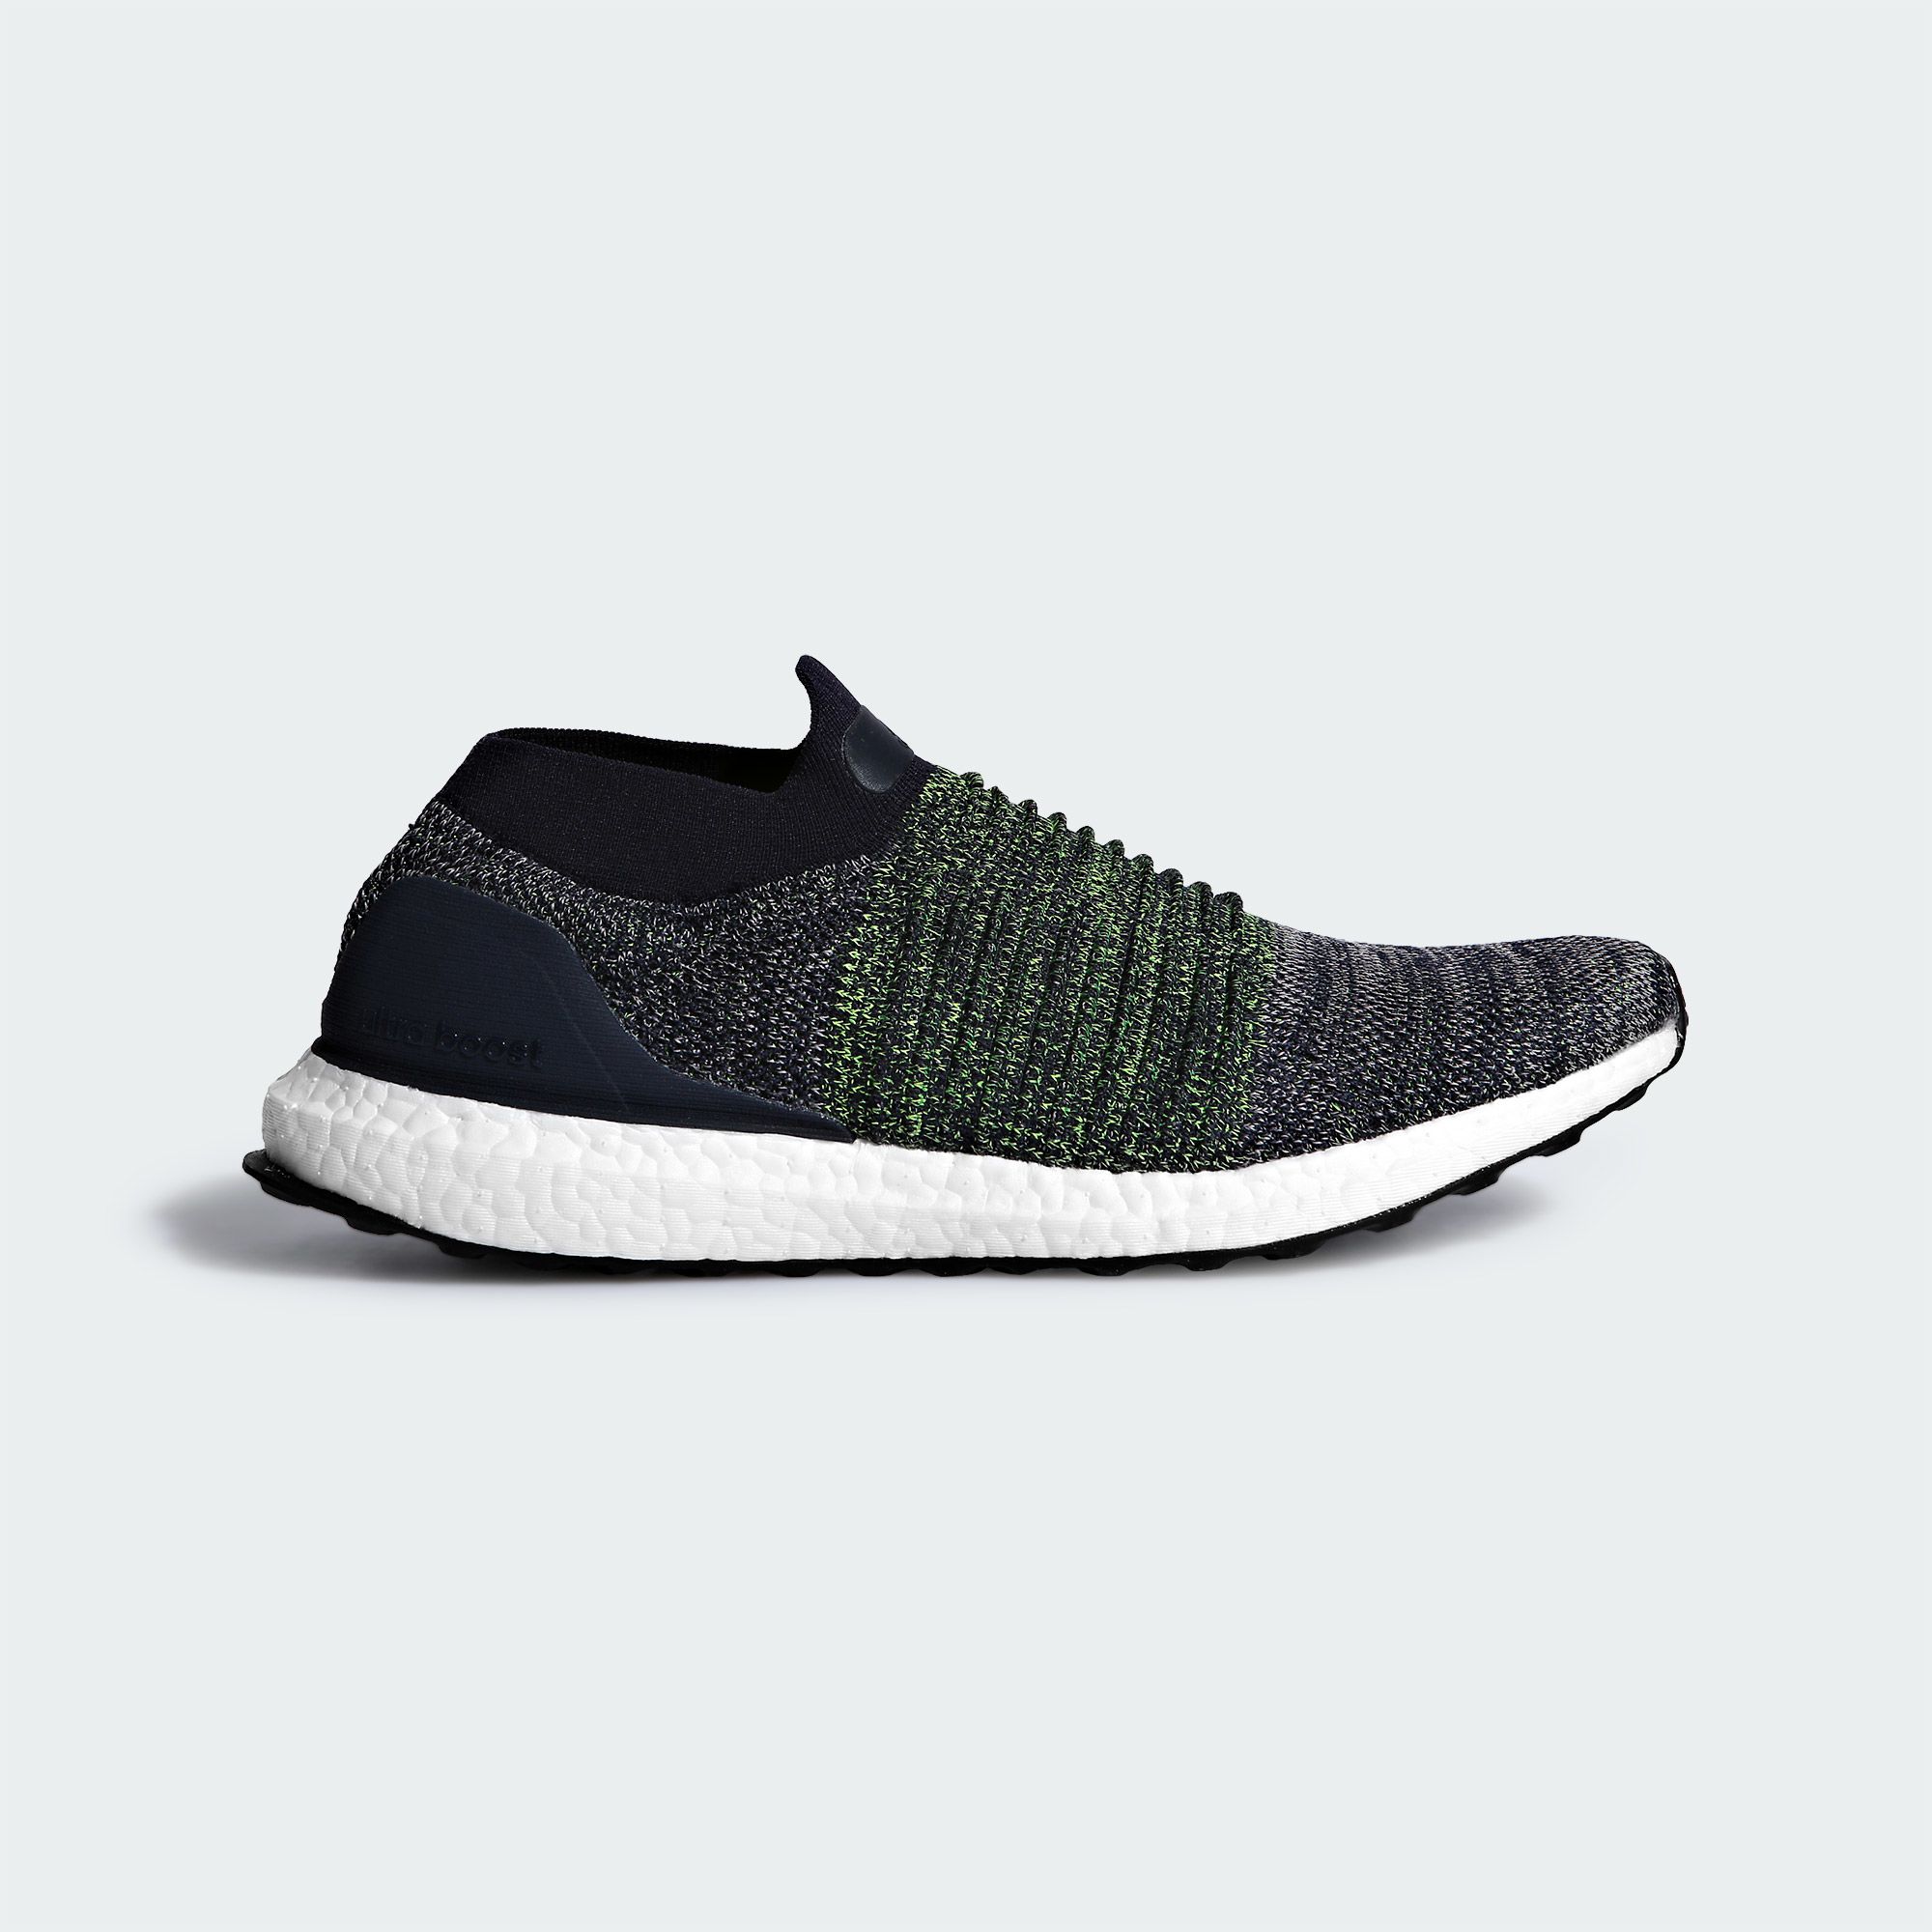 adidas-ultra-boost-laceless-legend-ink-green-2